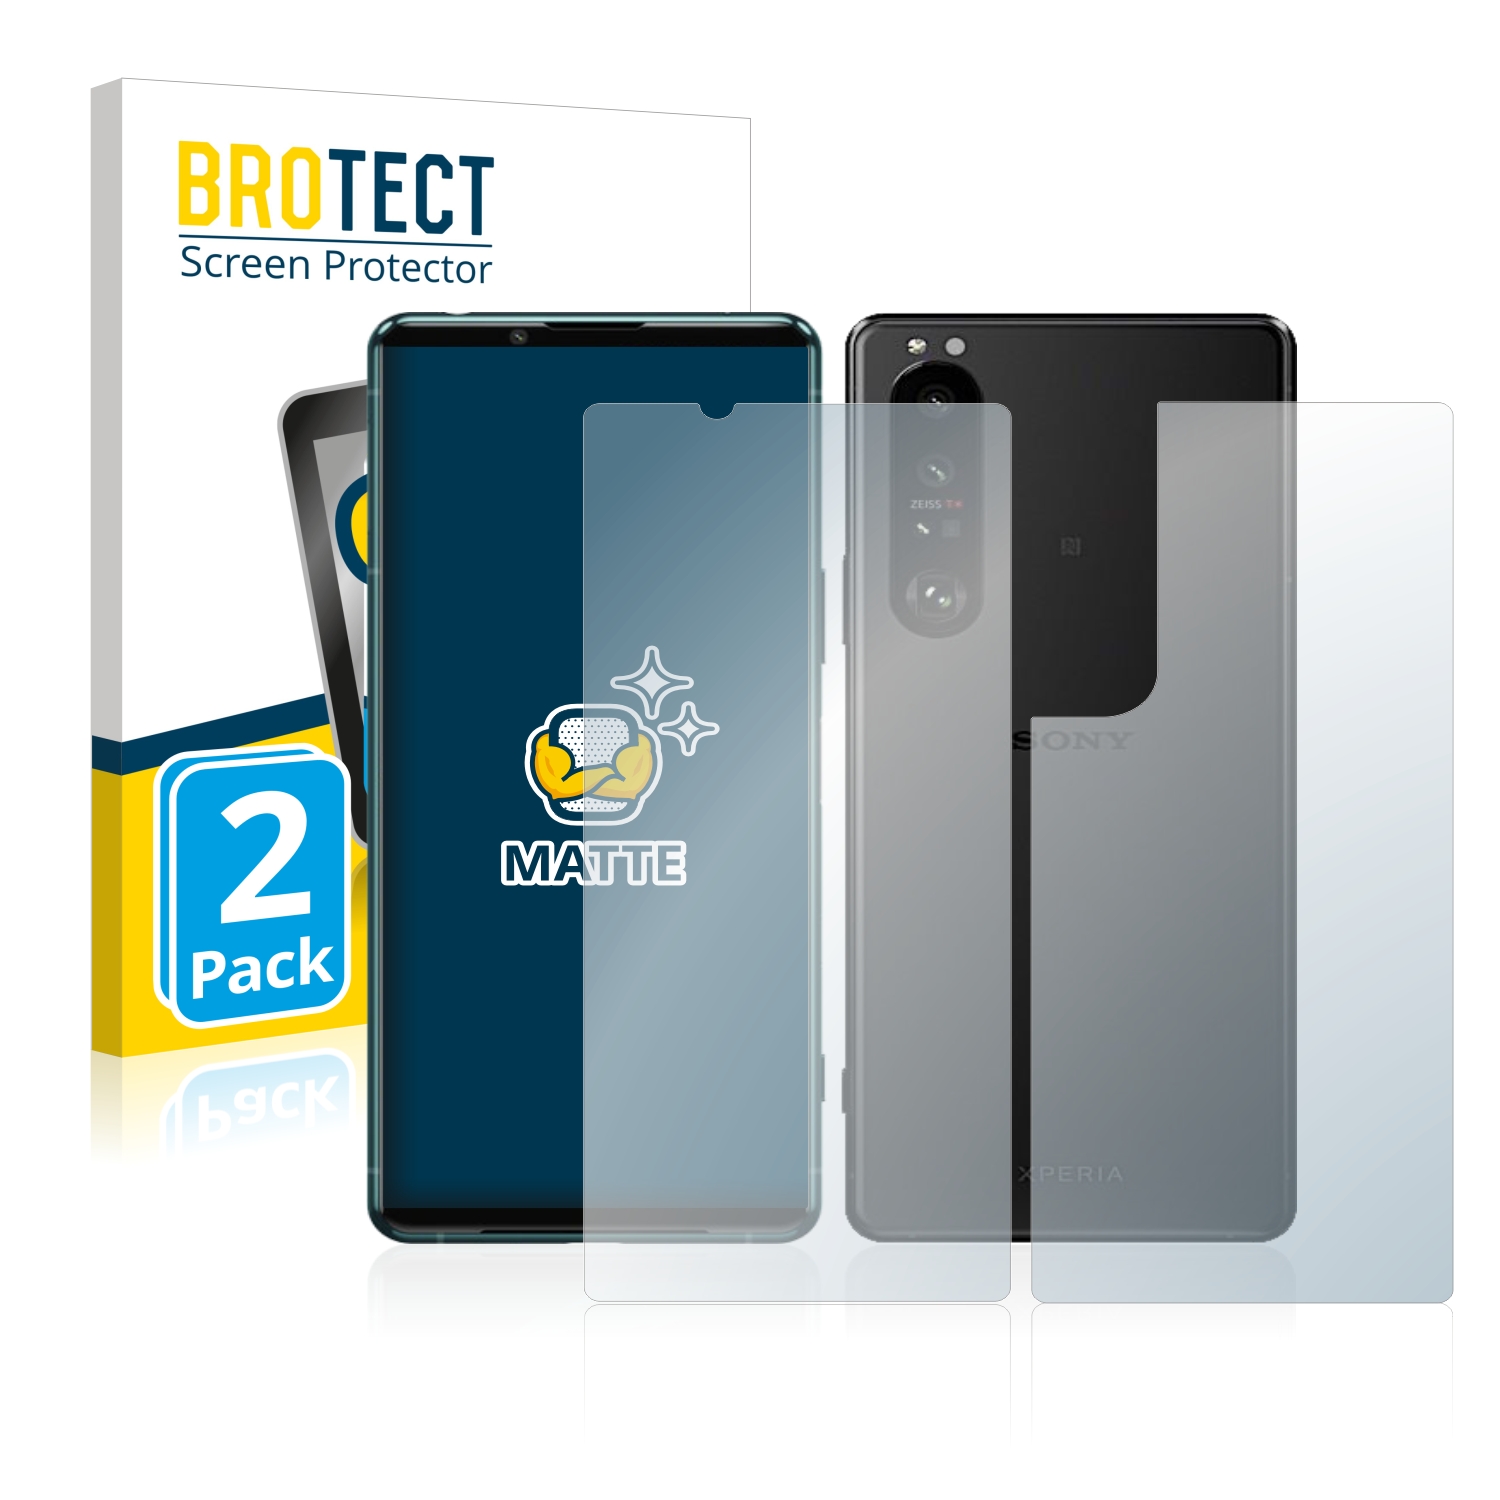 BROTECT 2x BROTECT Protection Ecran pour Sony Xperia E3 Dual D2212 Clair Film Protection 